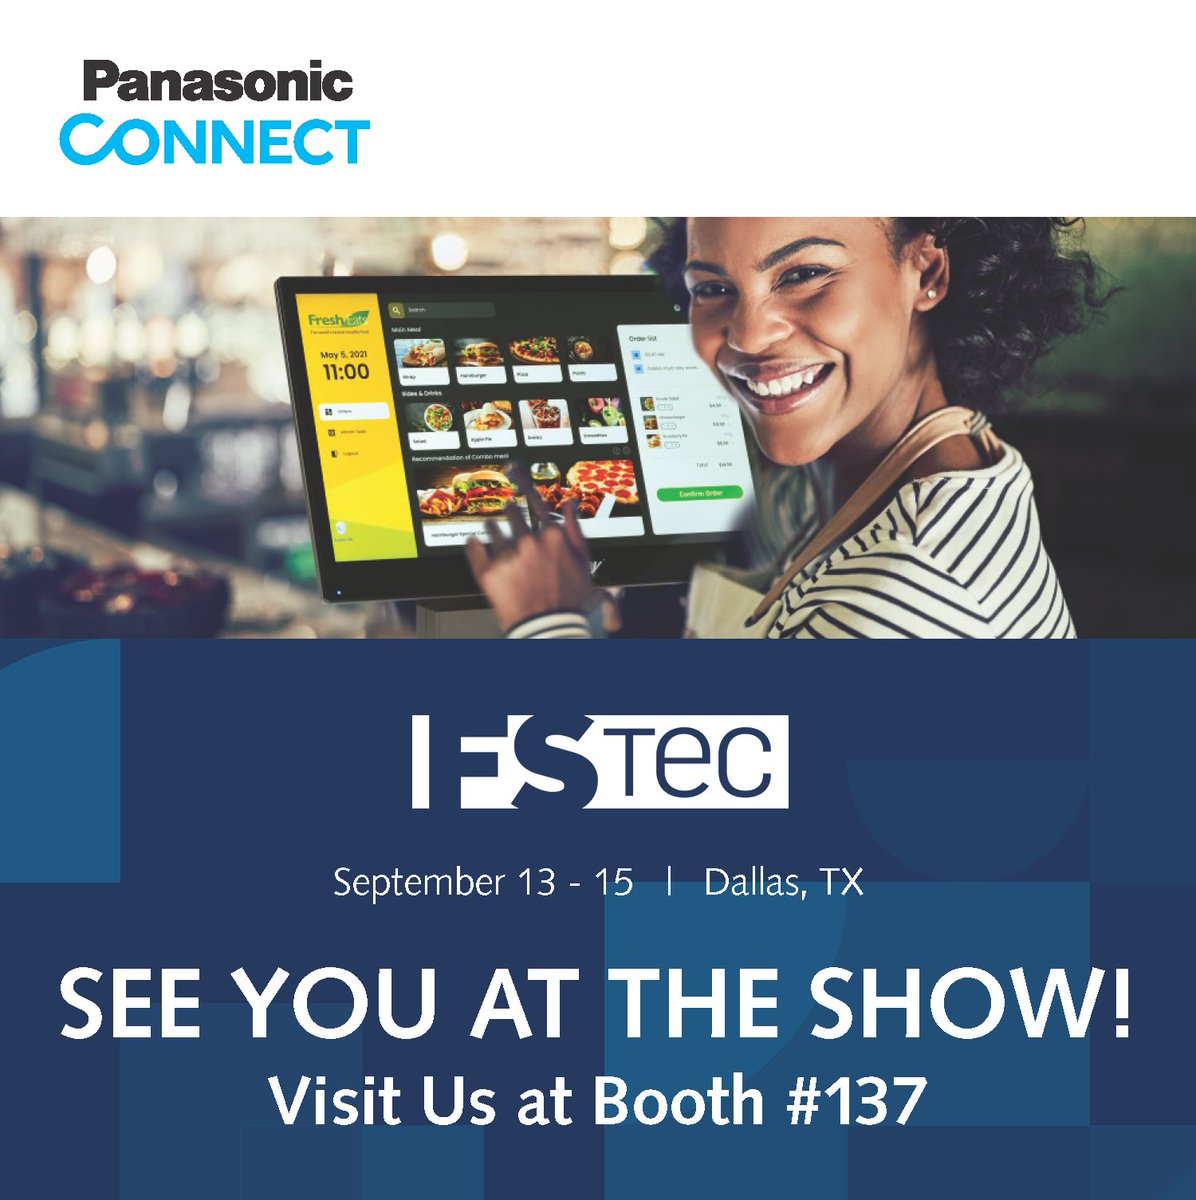 Looking for a reliable Point-of-Sale solution?

Check out the versatile and durable Stingray® Point of Sale Terminals and Self-Serve Kiosks. 
Visit #PanasonicConnect at #FSTEC - Booth 137. 

#restaurant #technology #POS #Kiosks #qsr  #fastcasuals